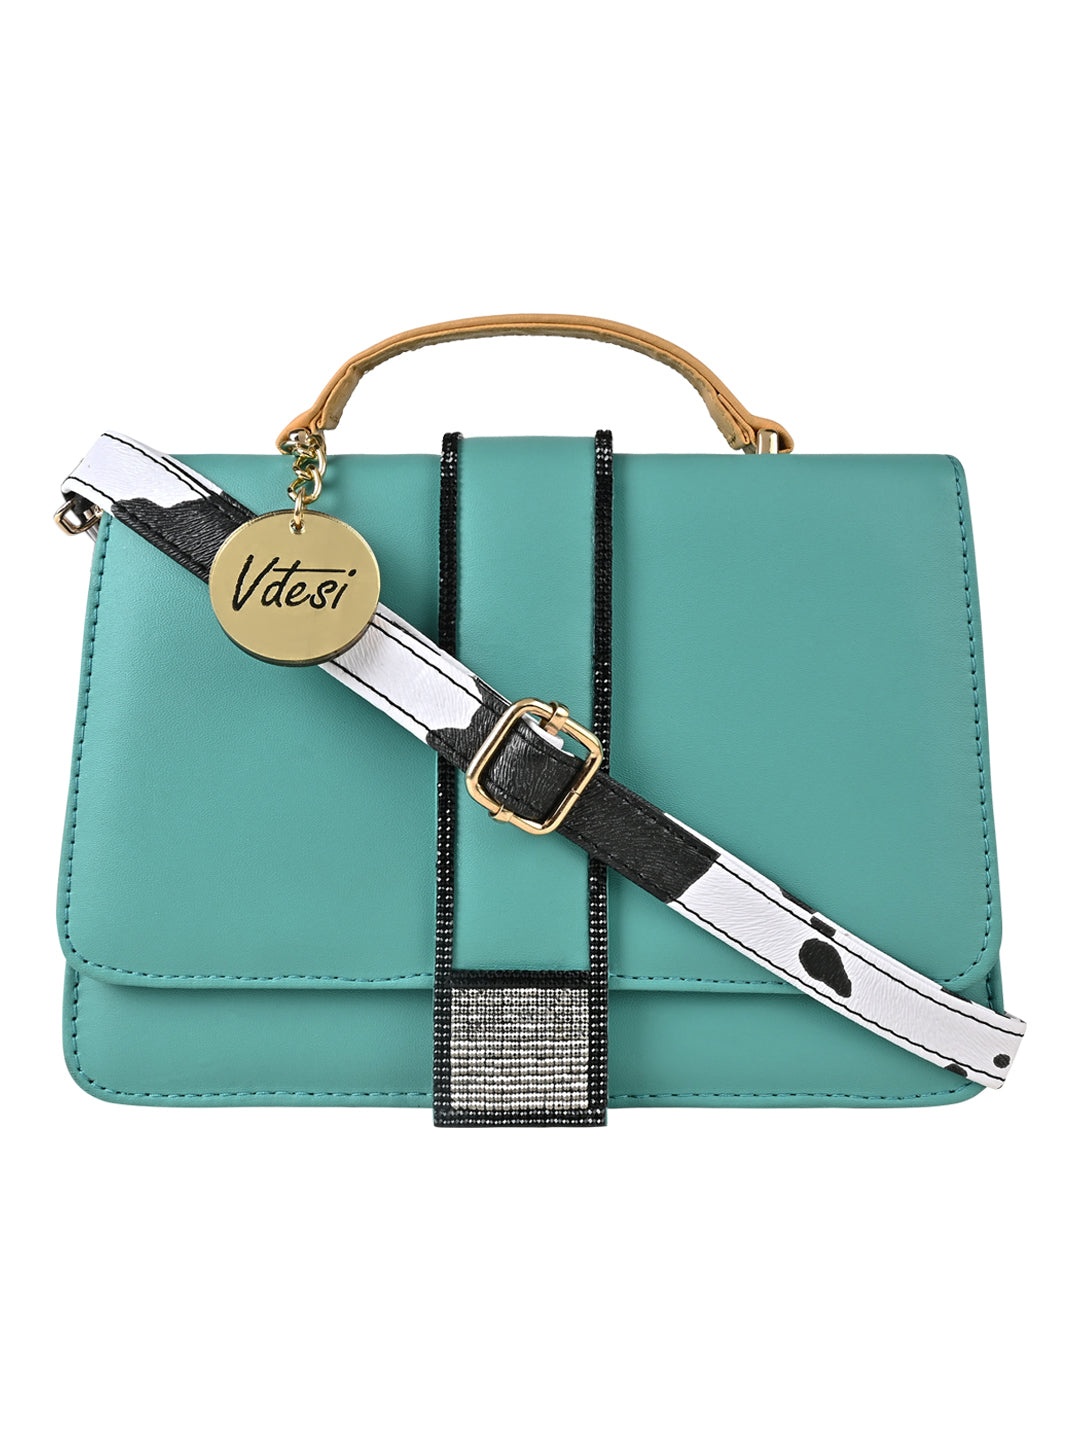 A Vdesi sling bag is perfect for a day out. 